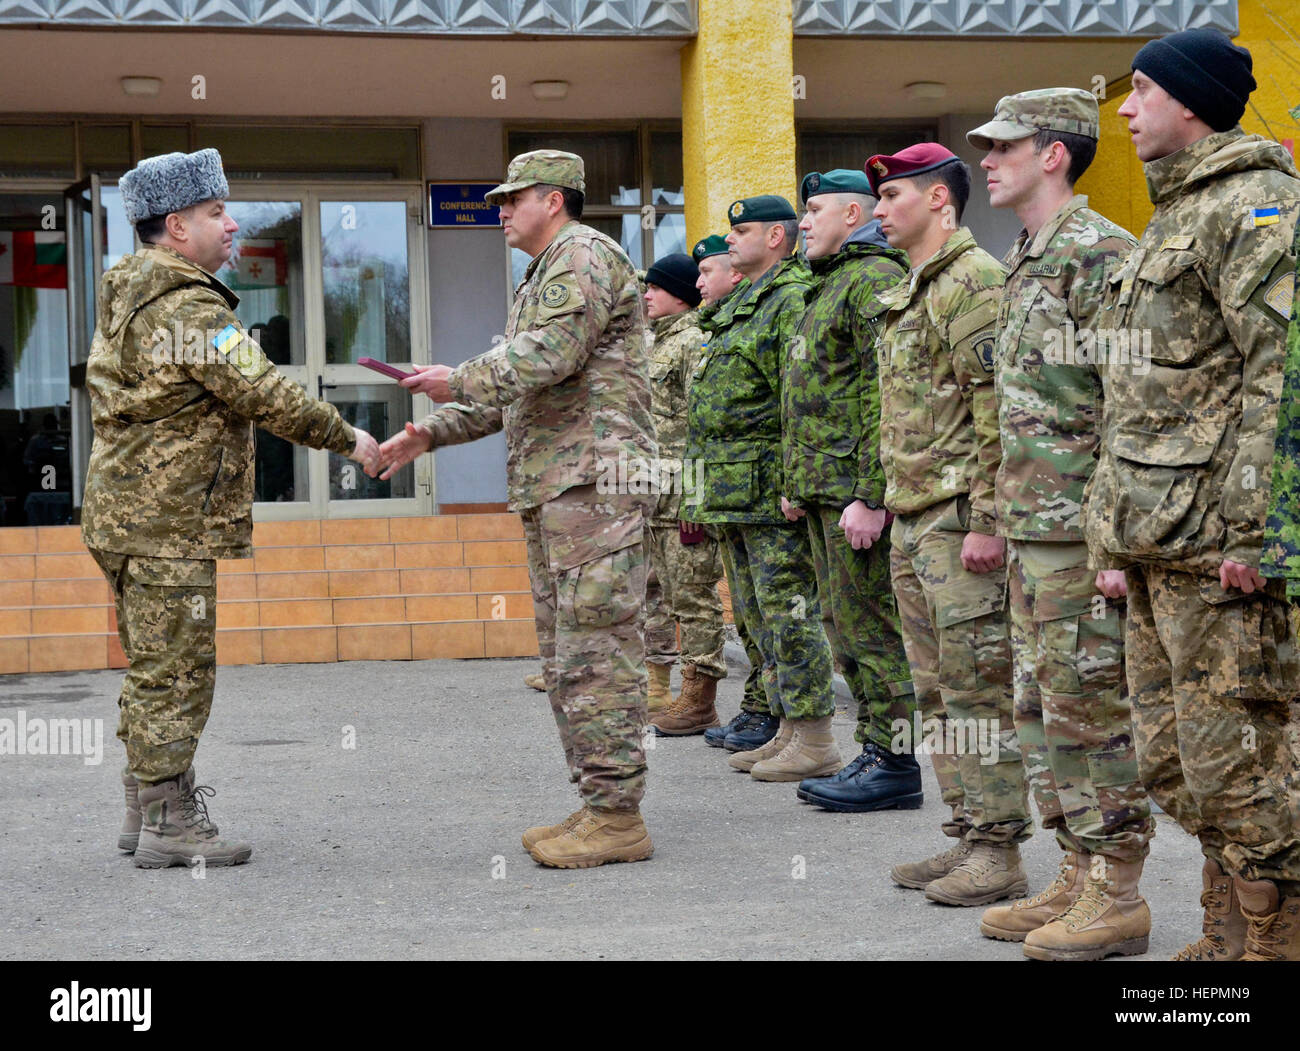 Col. Gen Stepan Poltarak, the Ukraine minister of defense (left), presents an award to Staff Sgt. Richard Medina, a fire finder radar operator (right), Dec. 15, 2015 at the International Peacekeeping Security Center. Defense ministers of Baltic countries and Poland visited Fearless Guardian II training areas after signing an agreement with Ukraine in order to continue further cooperation in the defense sector. (U.S. Army photo by Staff Sgt. Adriana M. Diaz-Brown, 10th Press Camp Headquarters) Award ceremony 151215-A-BR501-173 Stock Photo